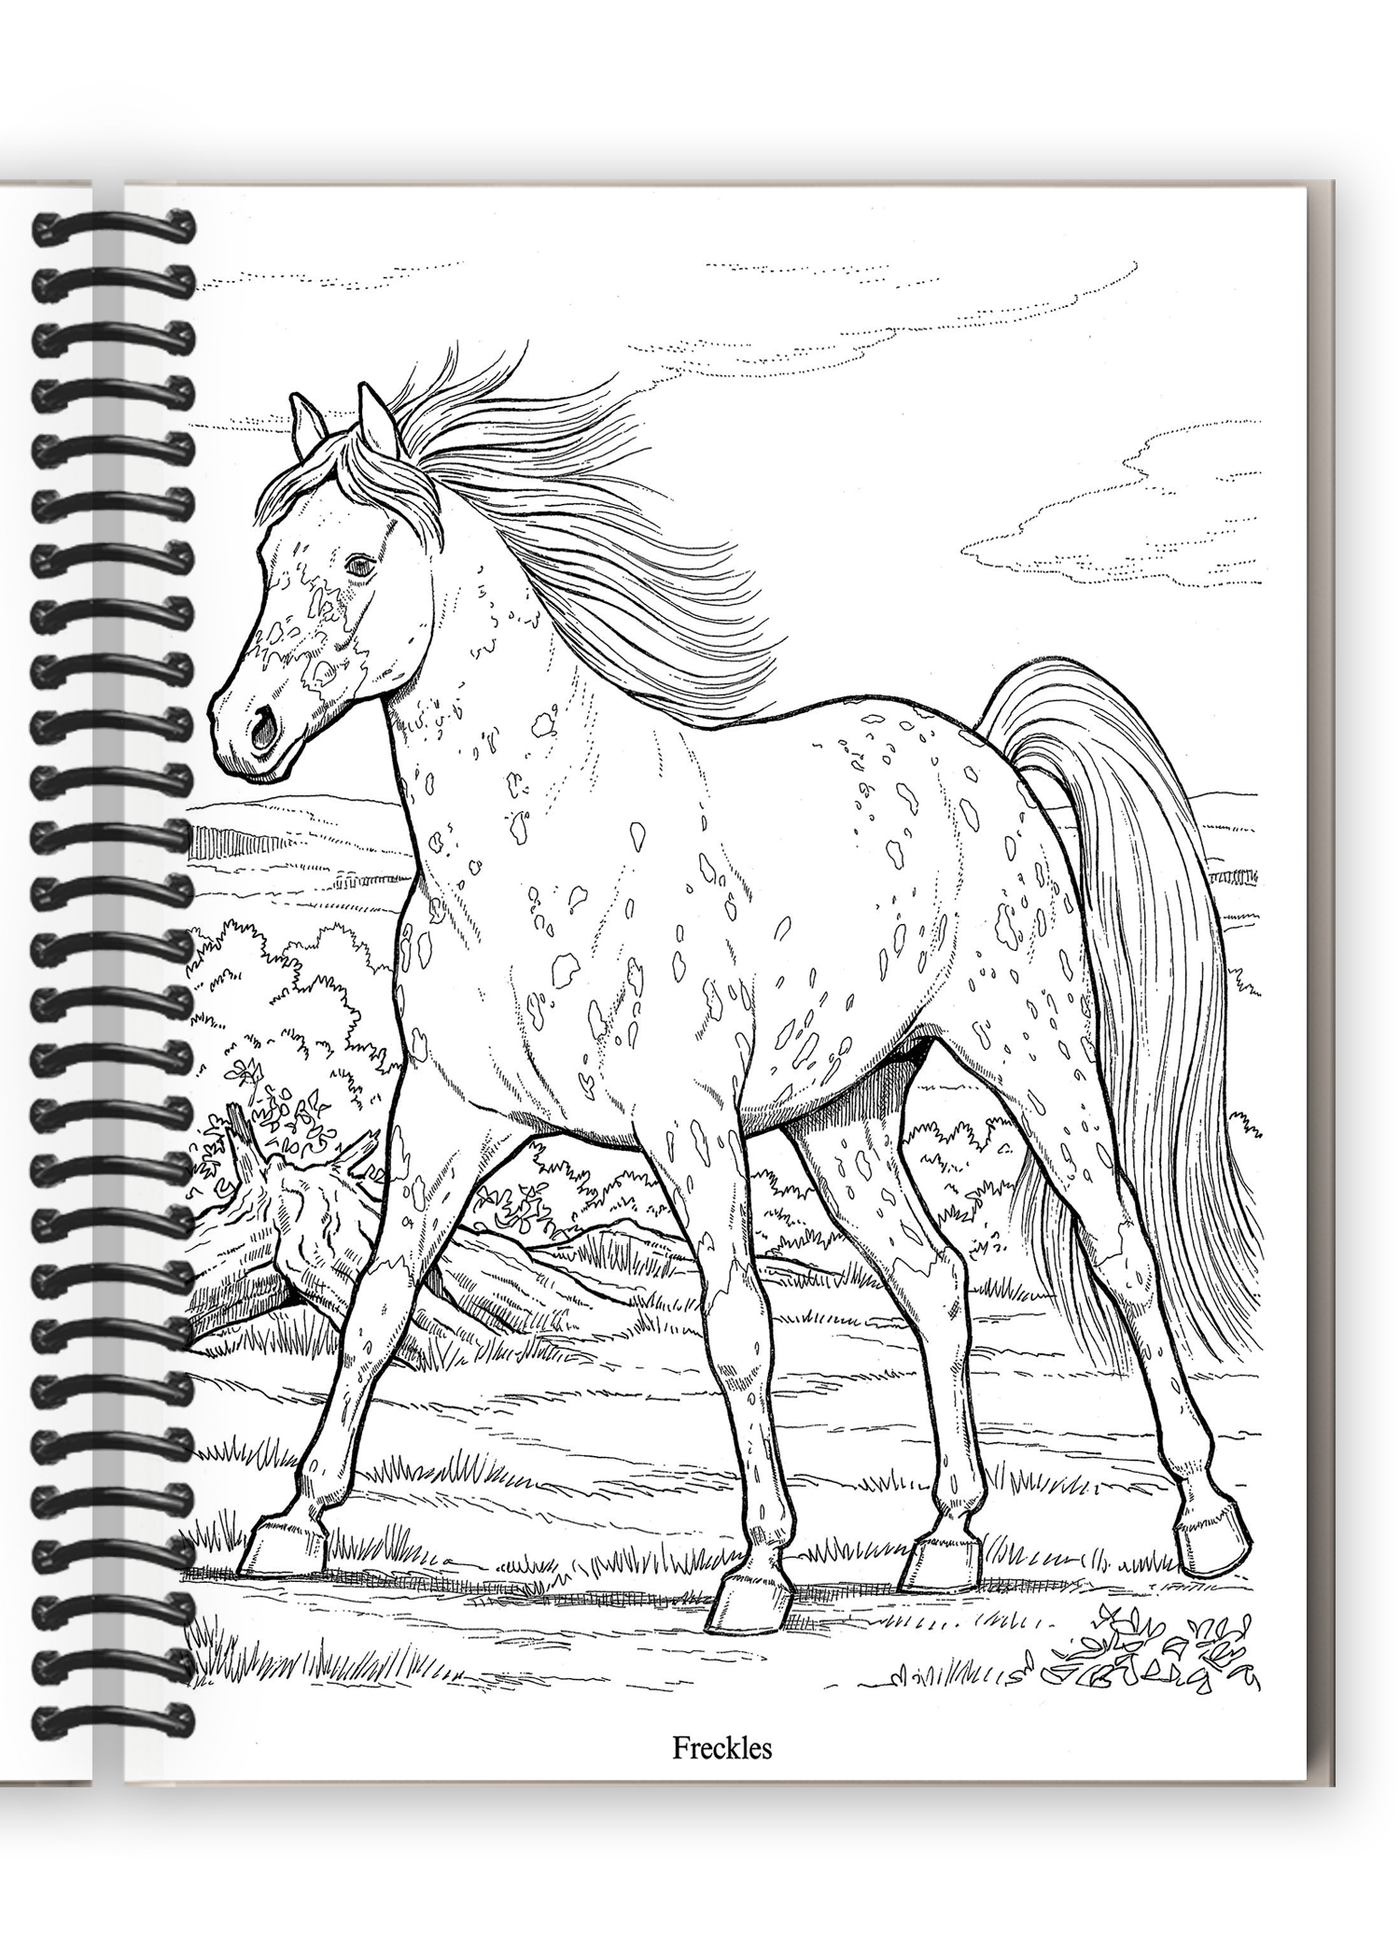 Wonderful World of Horses Coloring Book (Spiral Bound)